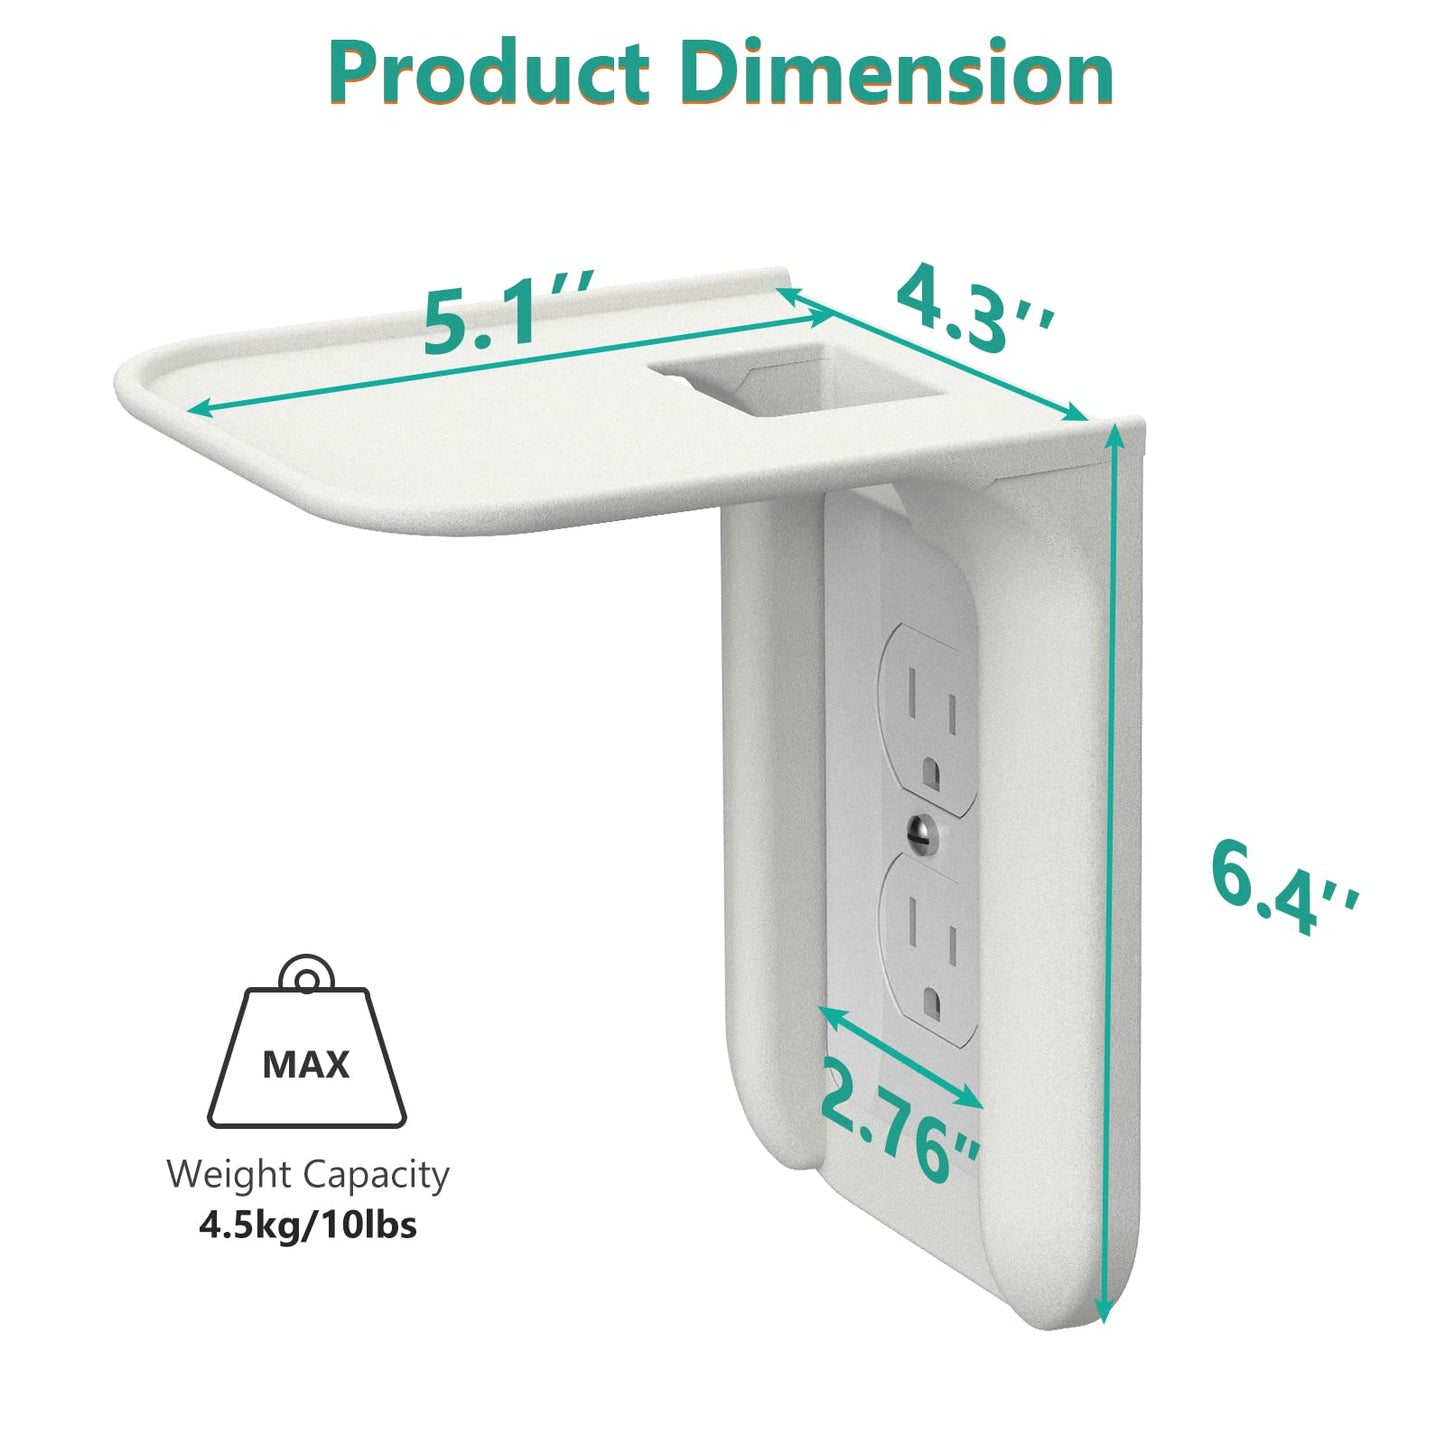 WALI Outlet Shelf Wall Holder,Bathroom Wall Shelf up to 10lbs Standard Vertical Duplex Wall Shelf Organizer for Smart Home Decor Space Saving Power Tools, Toothbrush (OLS001-W), 1 Pack, White